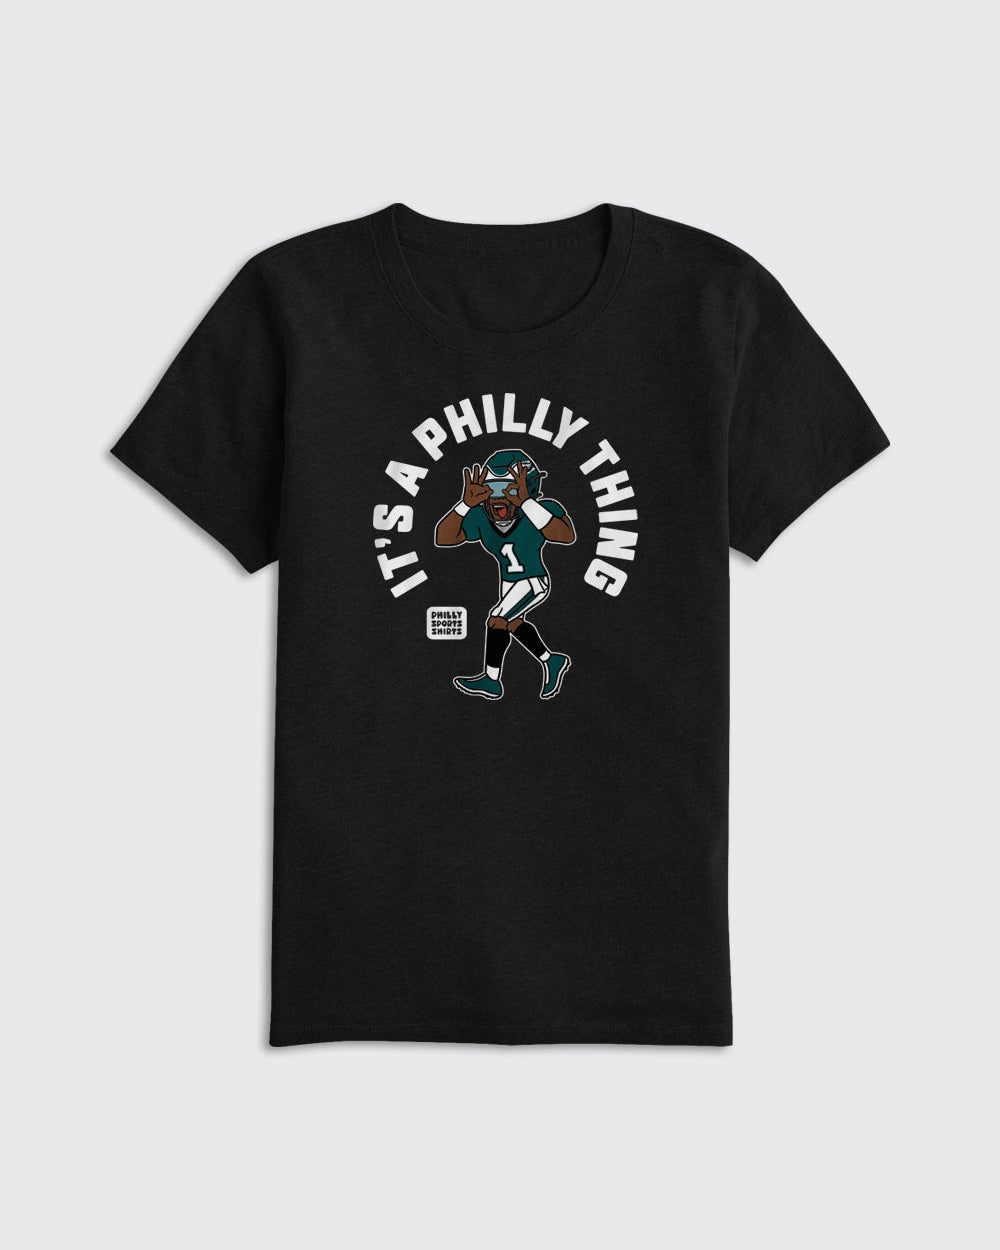 Ben Franklin Eagles Shirt - Philly Sports Shirts